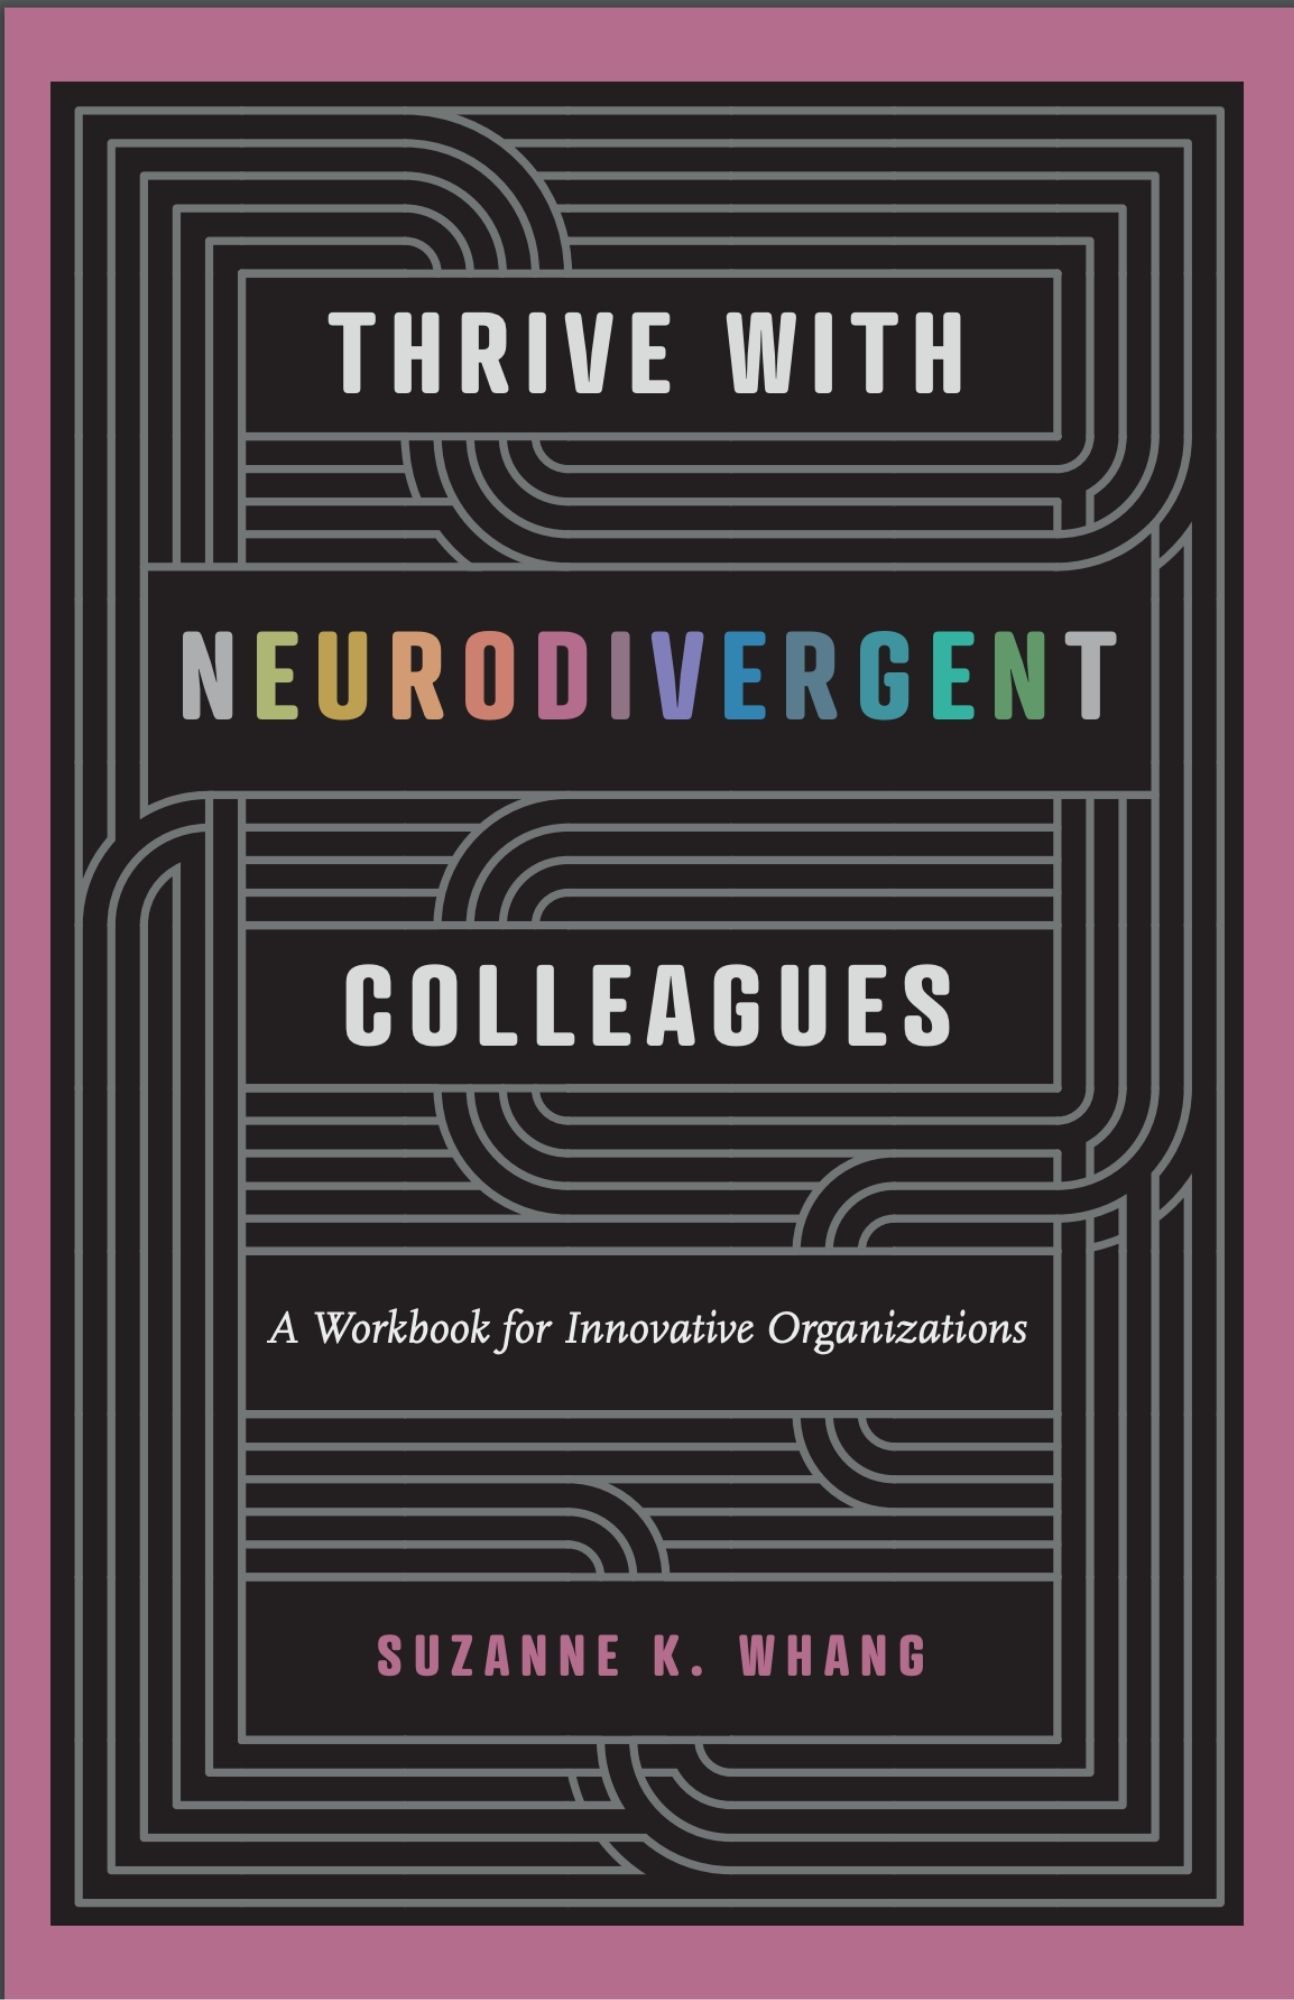 "Thrive With Neurodivergent Colleagues" is a Concise Book That Empowers Innovative Leaders to Think Deeply and Act Swiftly to Promote Neurodiversity